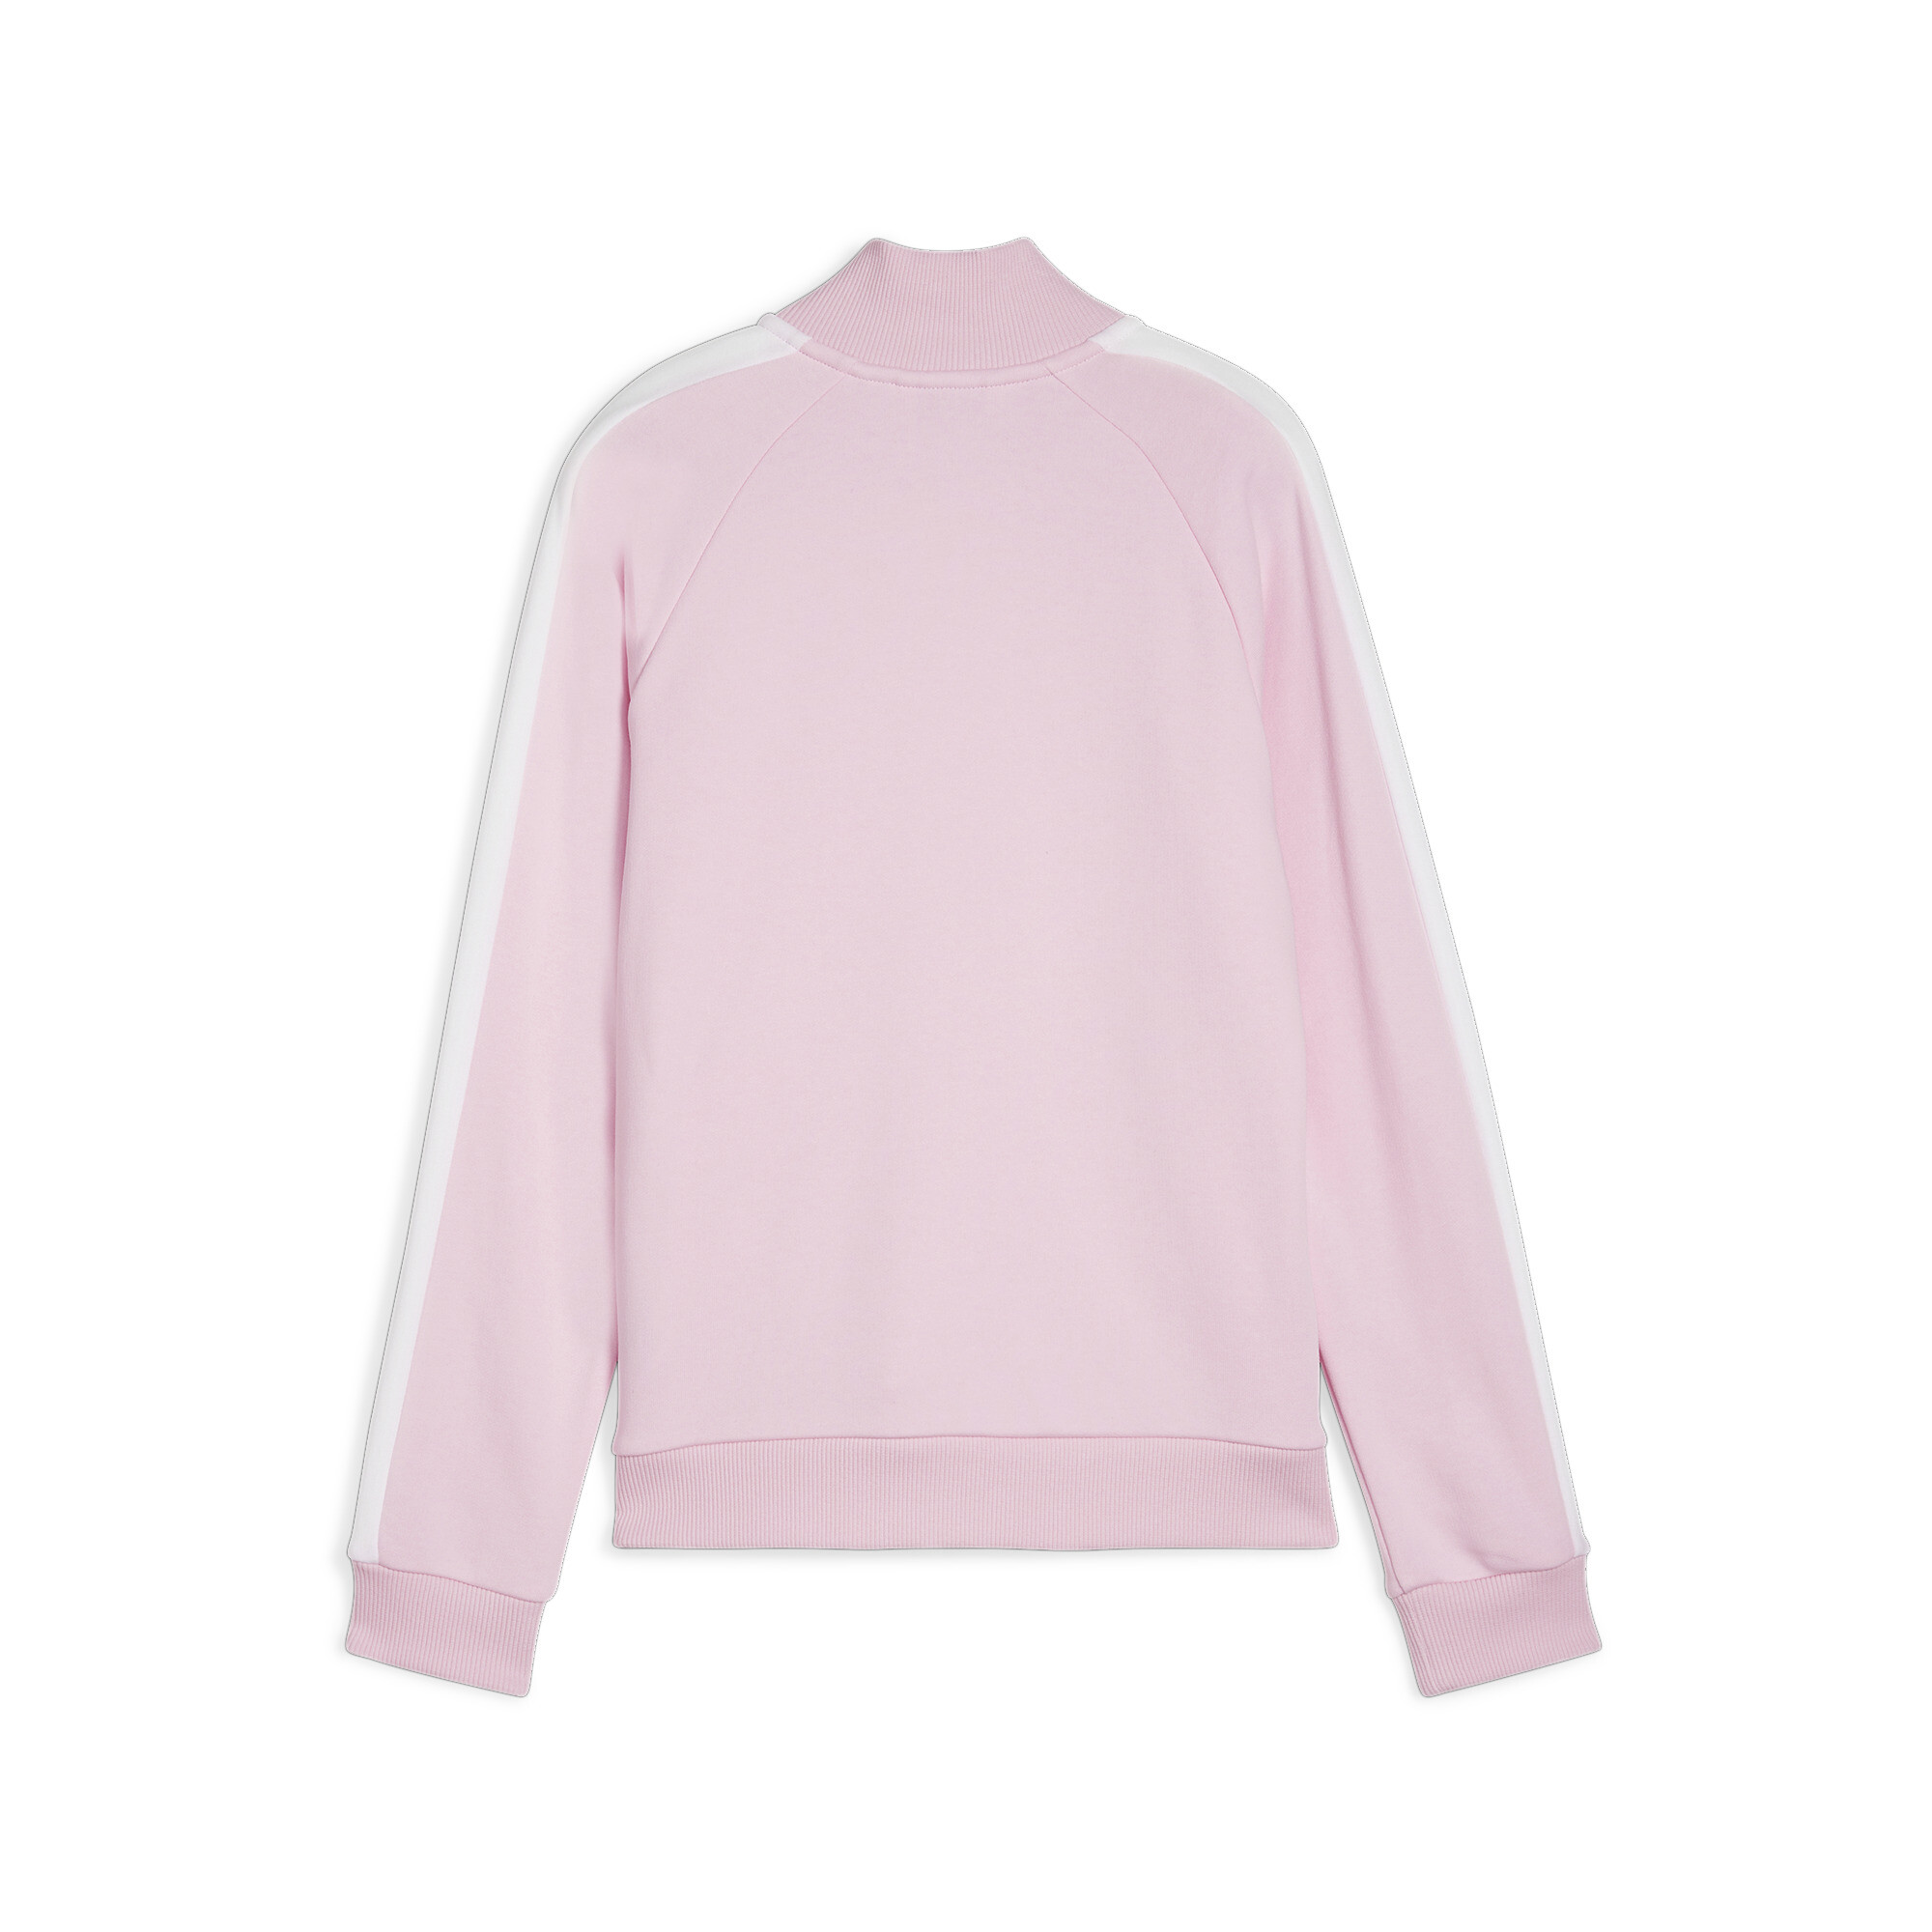 PUMA Classics T7 Track Jacket In Pink, Size 15-16 Youth